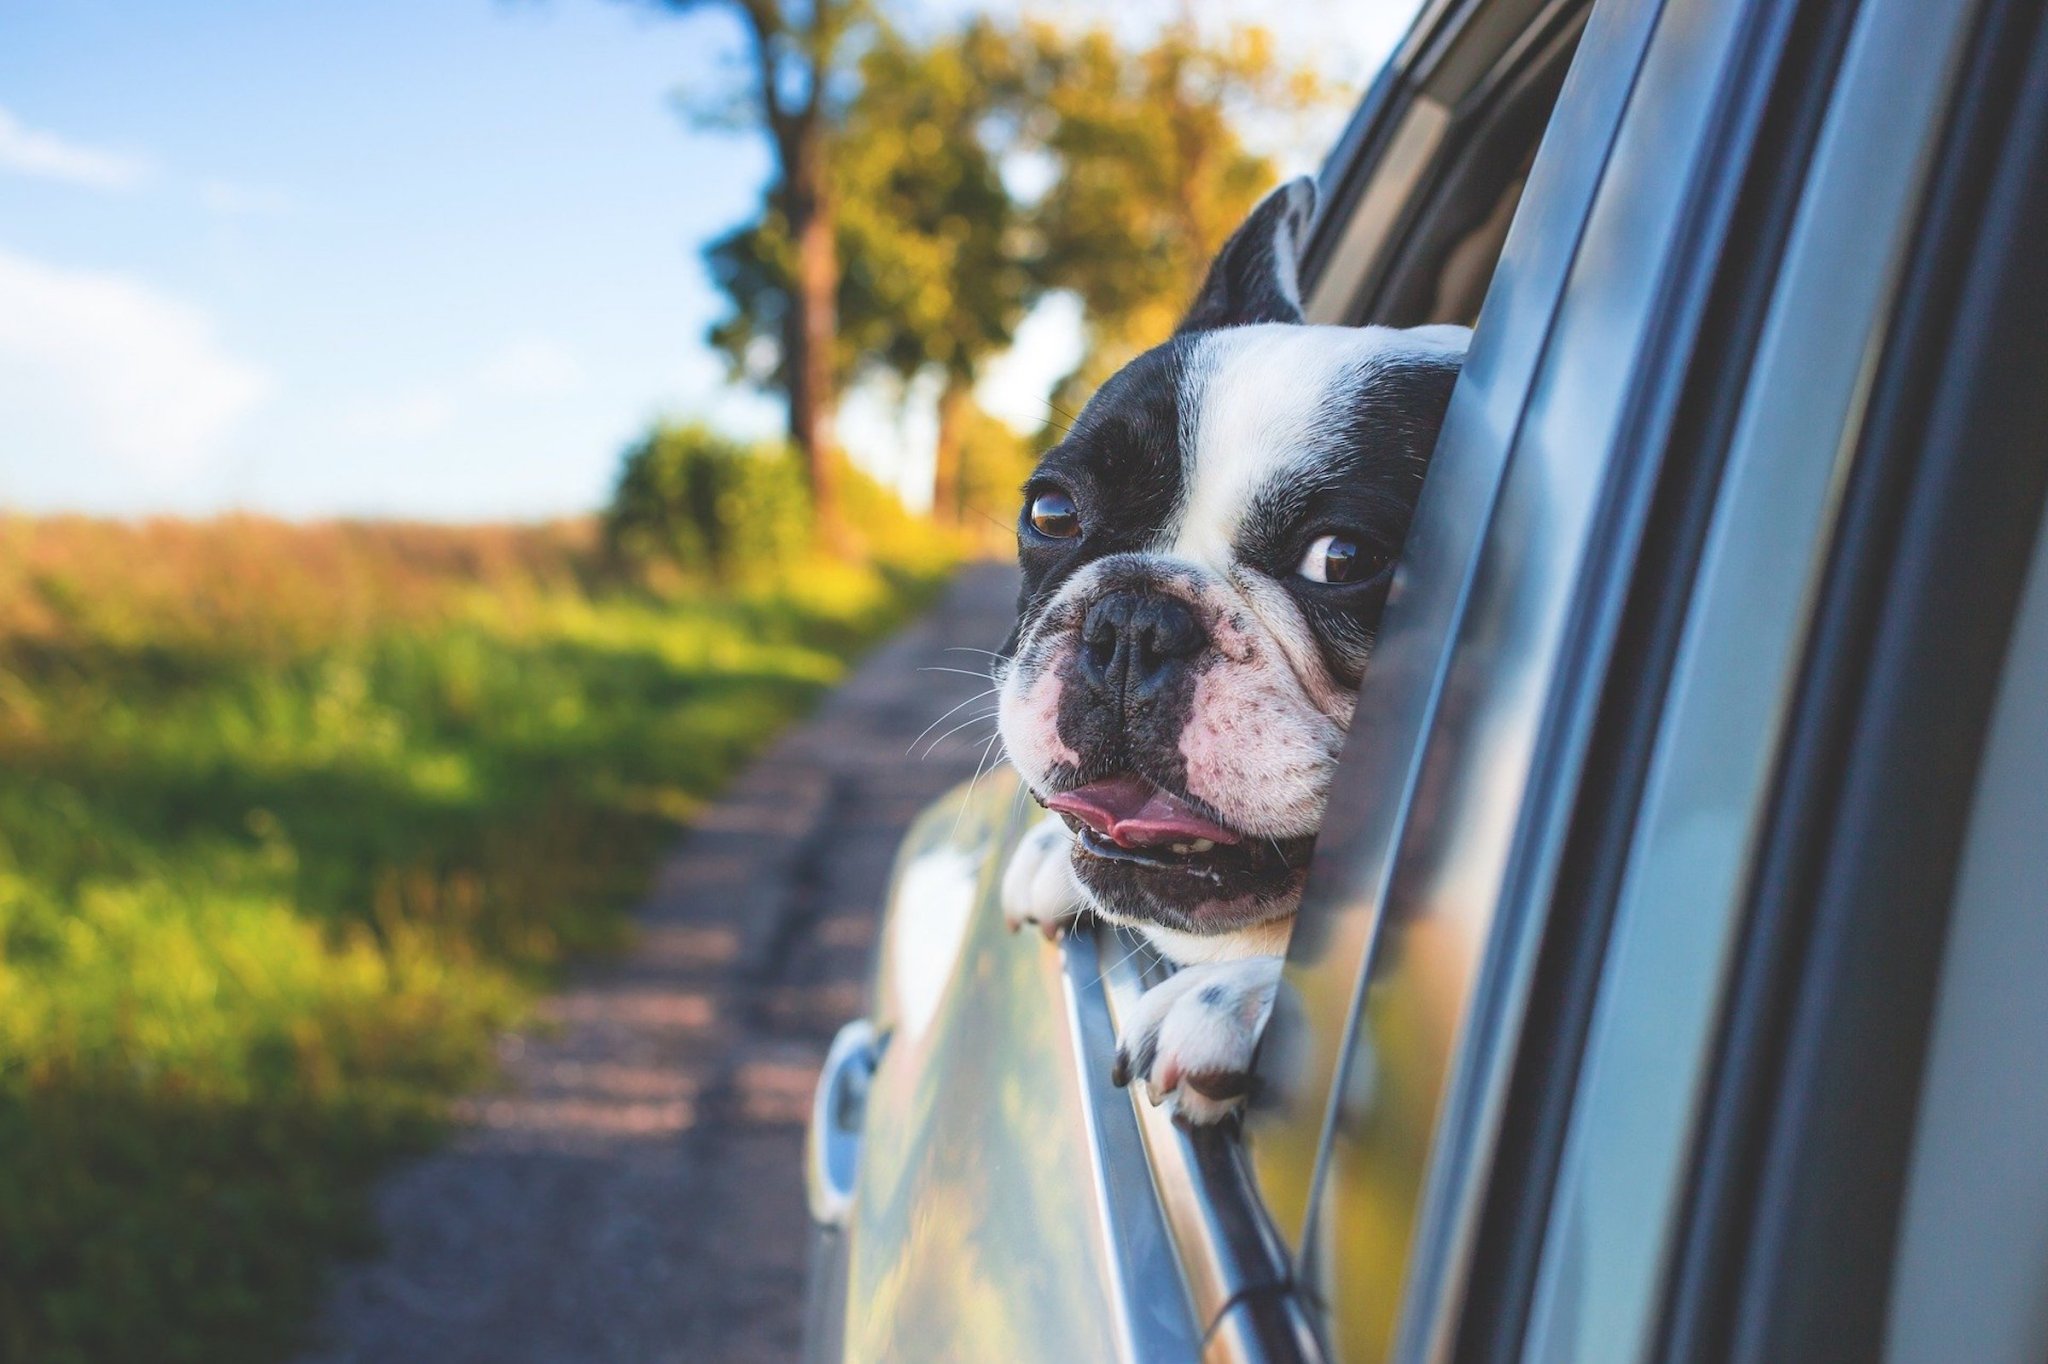 Follow these tips to make car rides bearable for your anxious dog